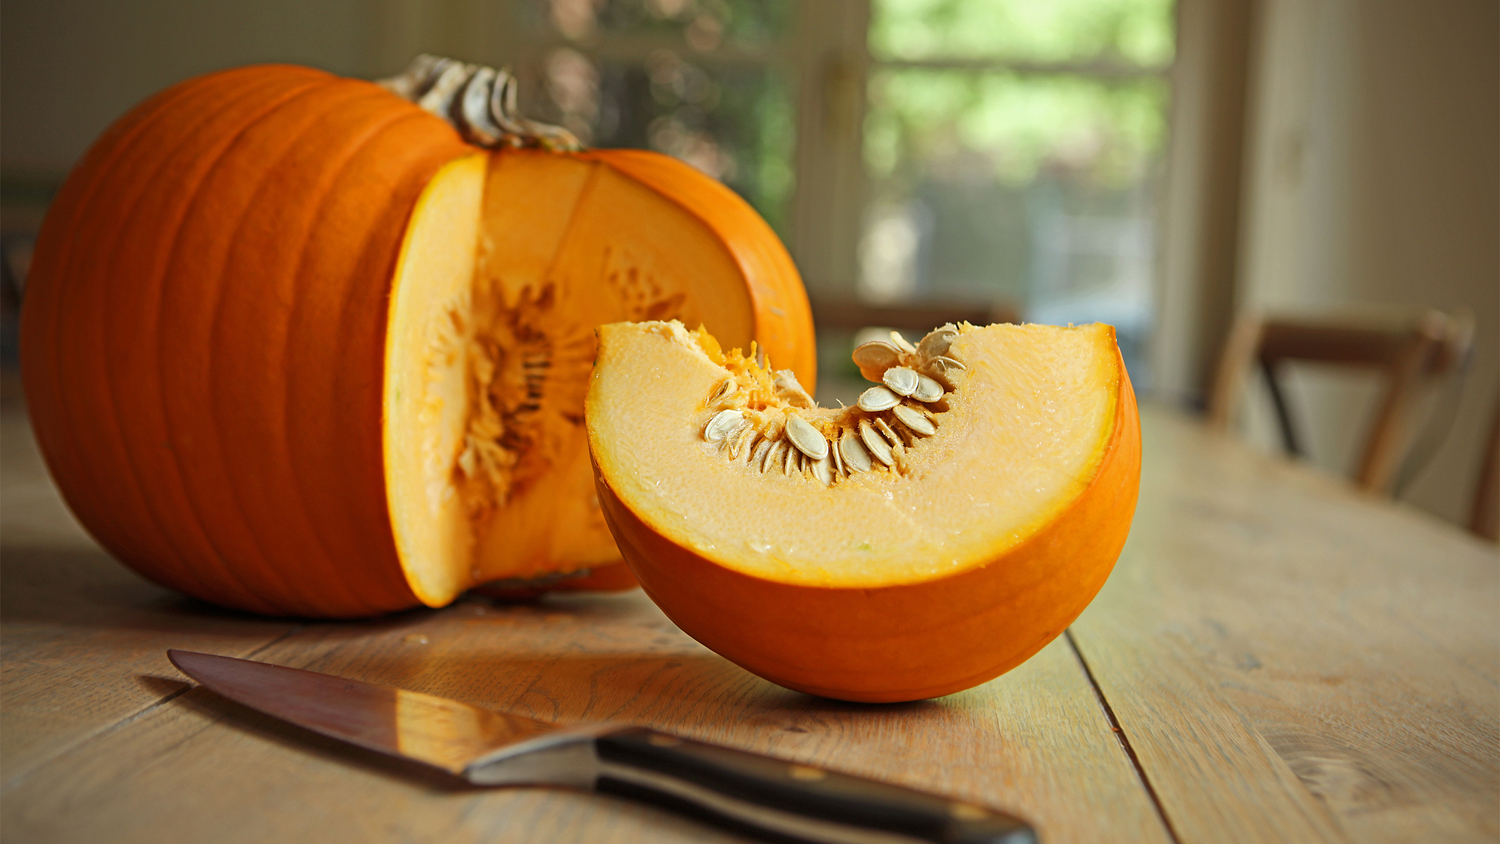 An orange pumpkin on a kitchen table with a slice cut off and laying next to the pumpkin, as is a kitchen knife.